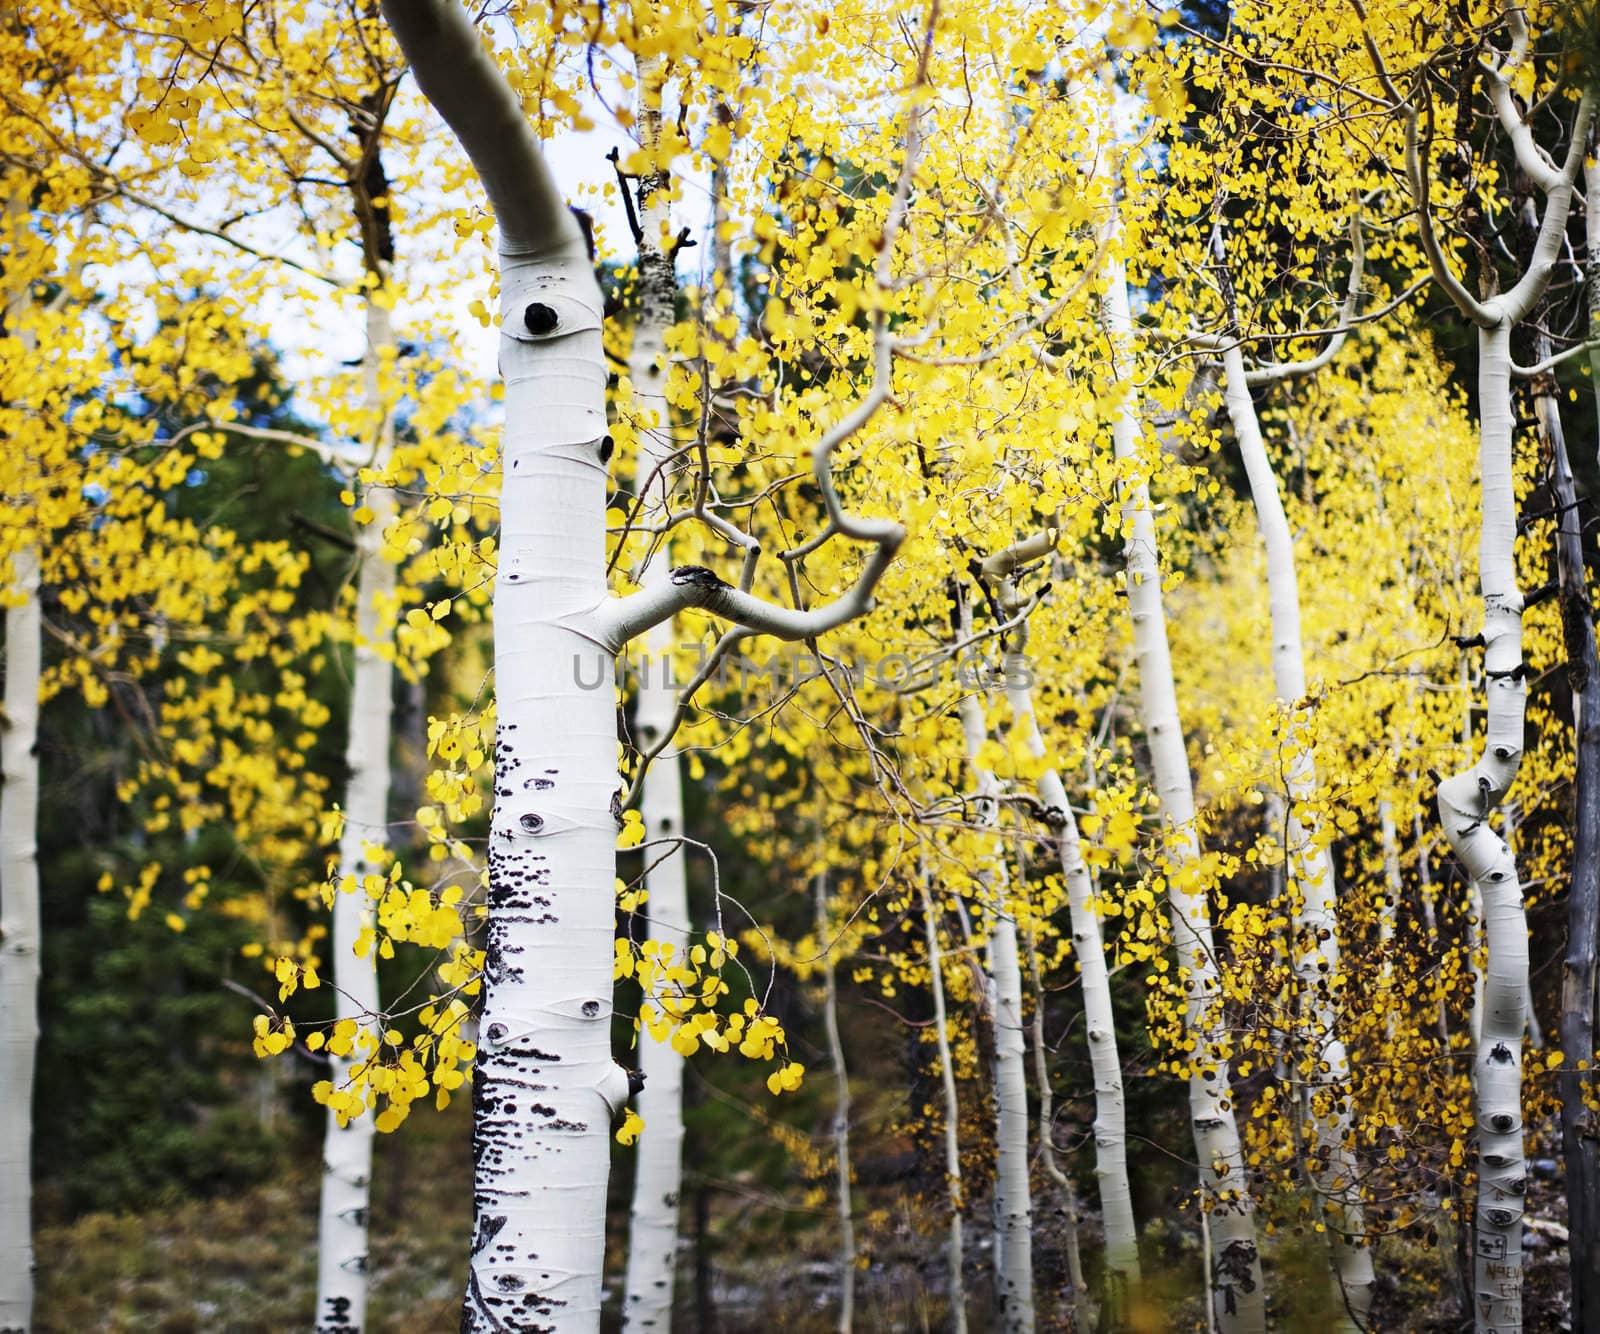 aspen trees lined together in the forest with a landscape of fall colors on the leaves in yellow and orange